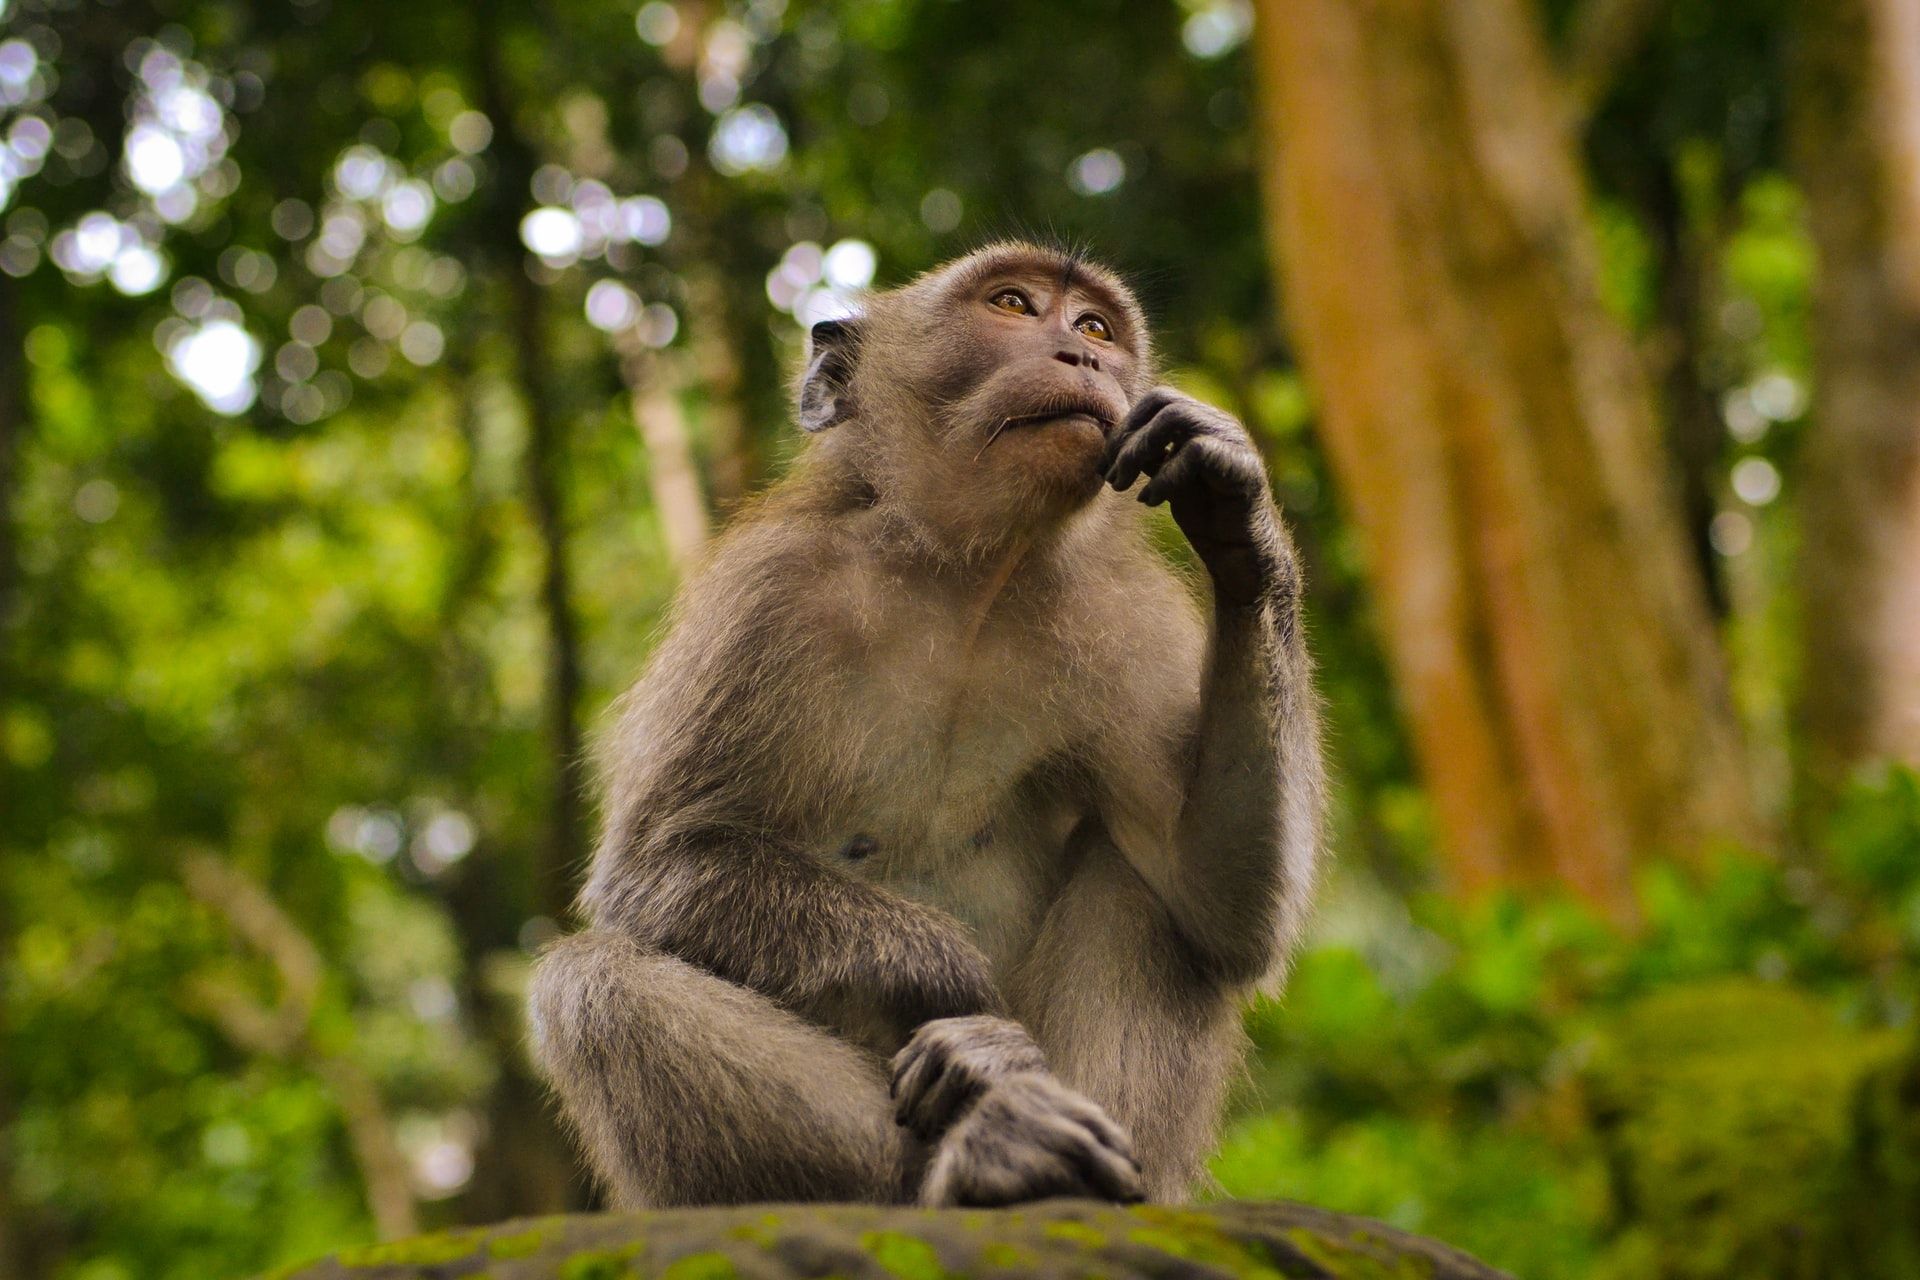 Shot of a monkey lost in thought